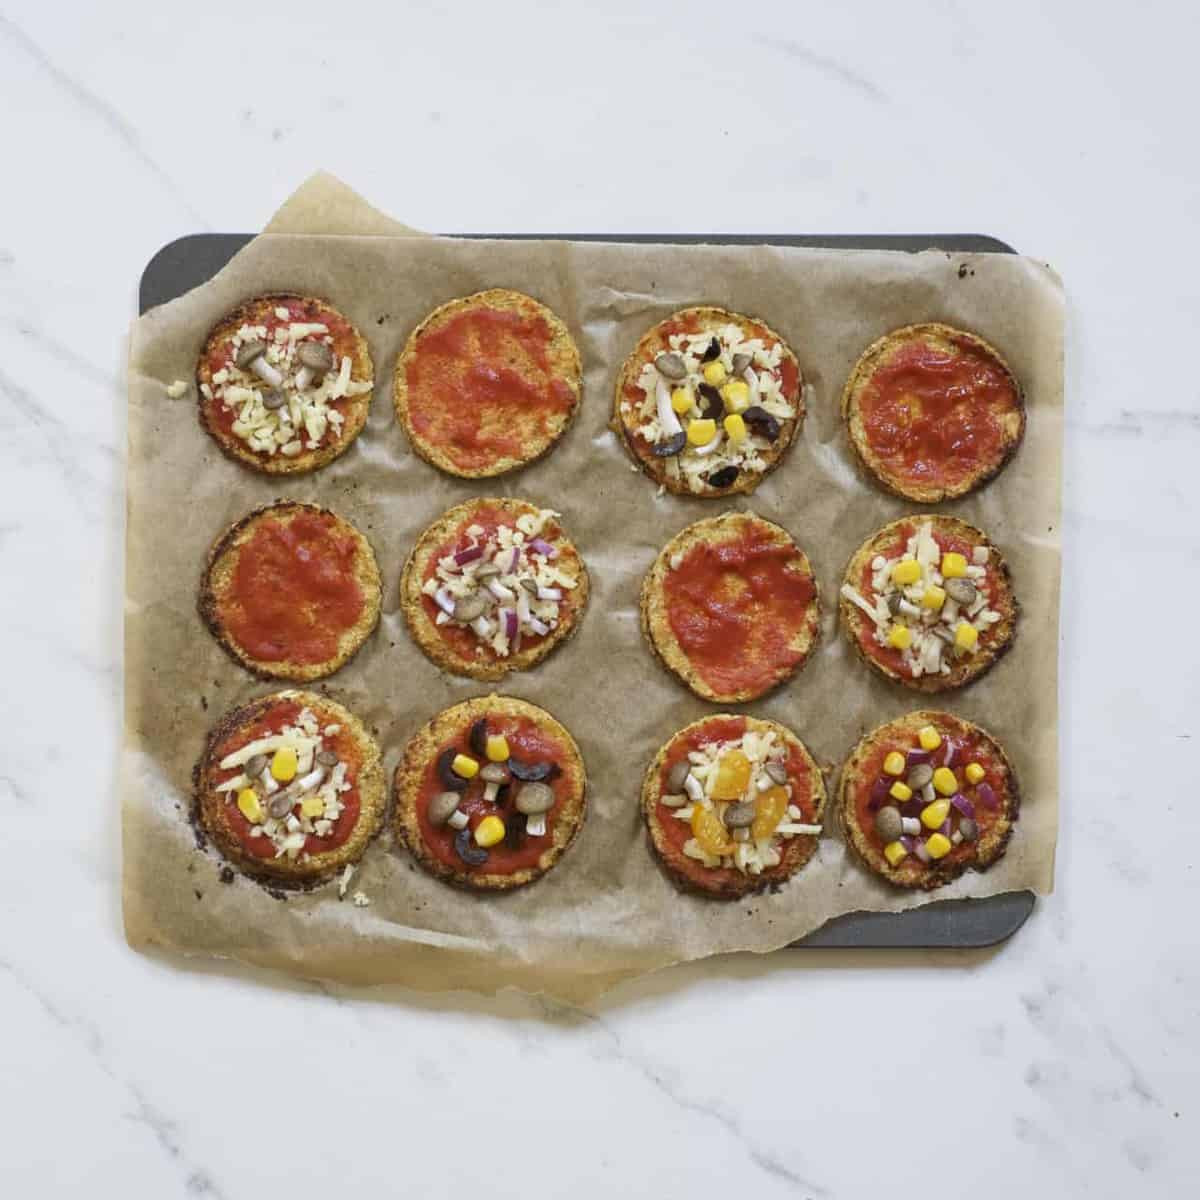 Baked mimi pizzas topped with tomato sauce and some with cheese, corn and mini mushrooms on a baking tray